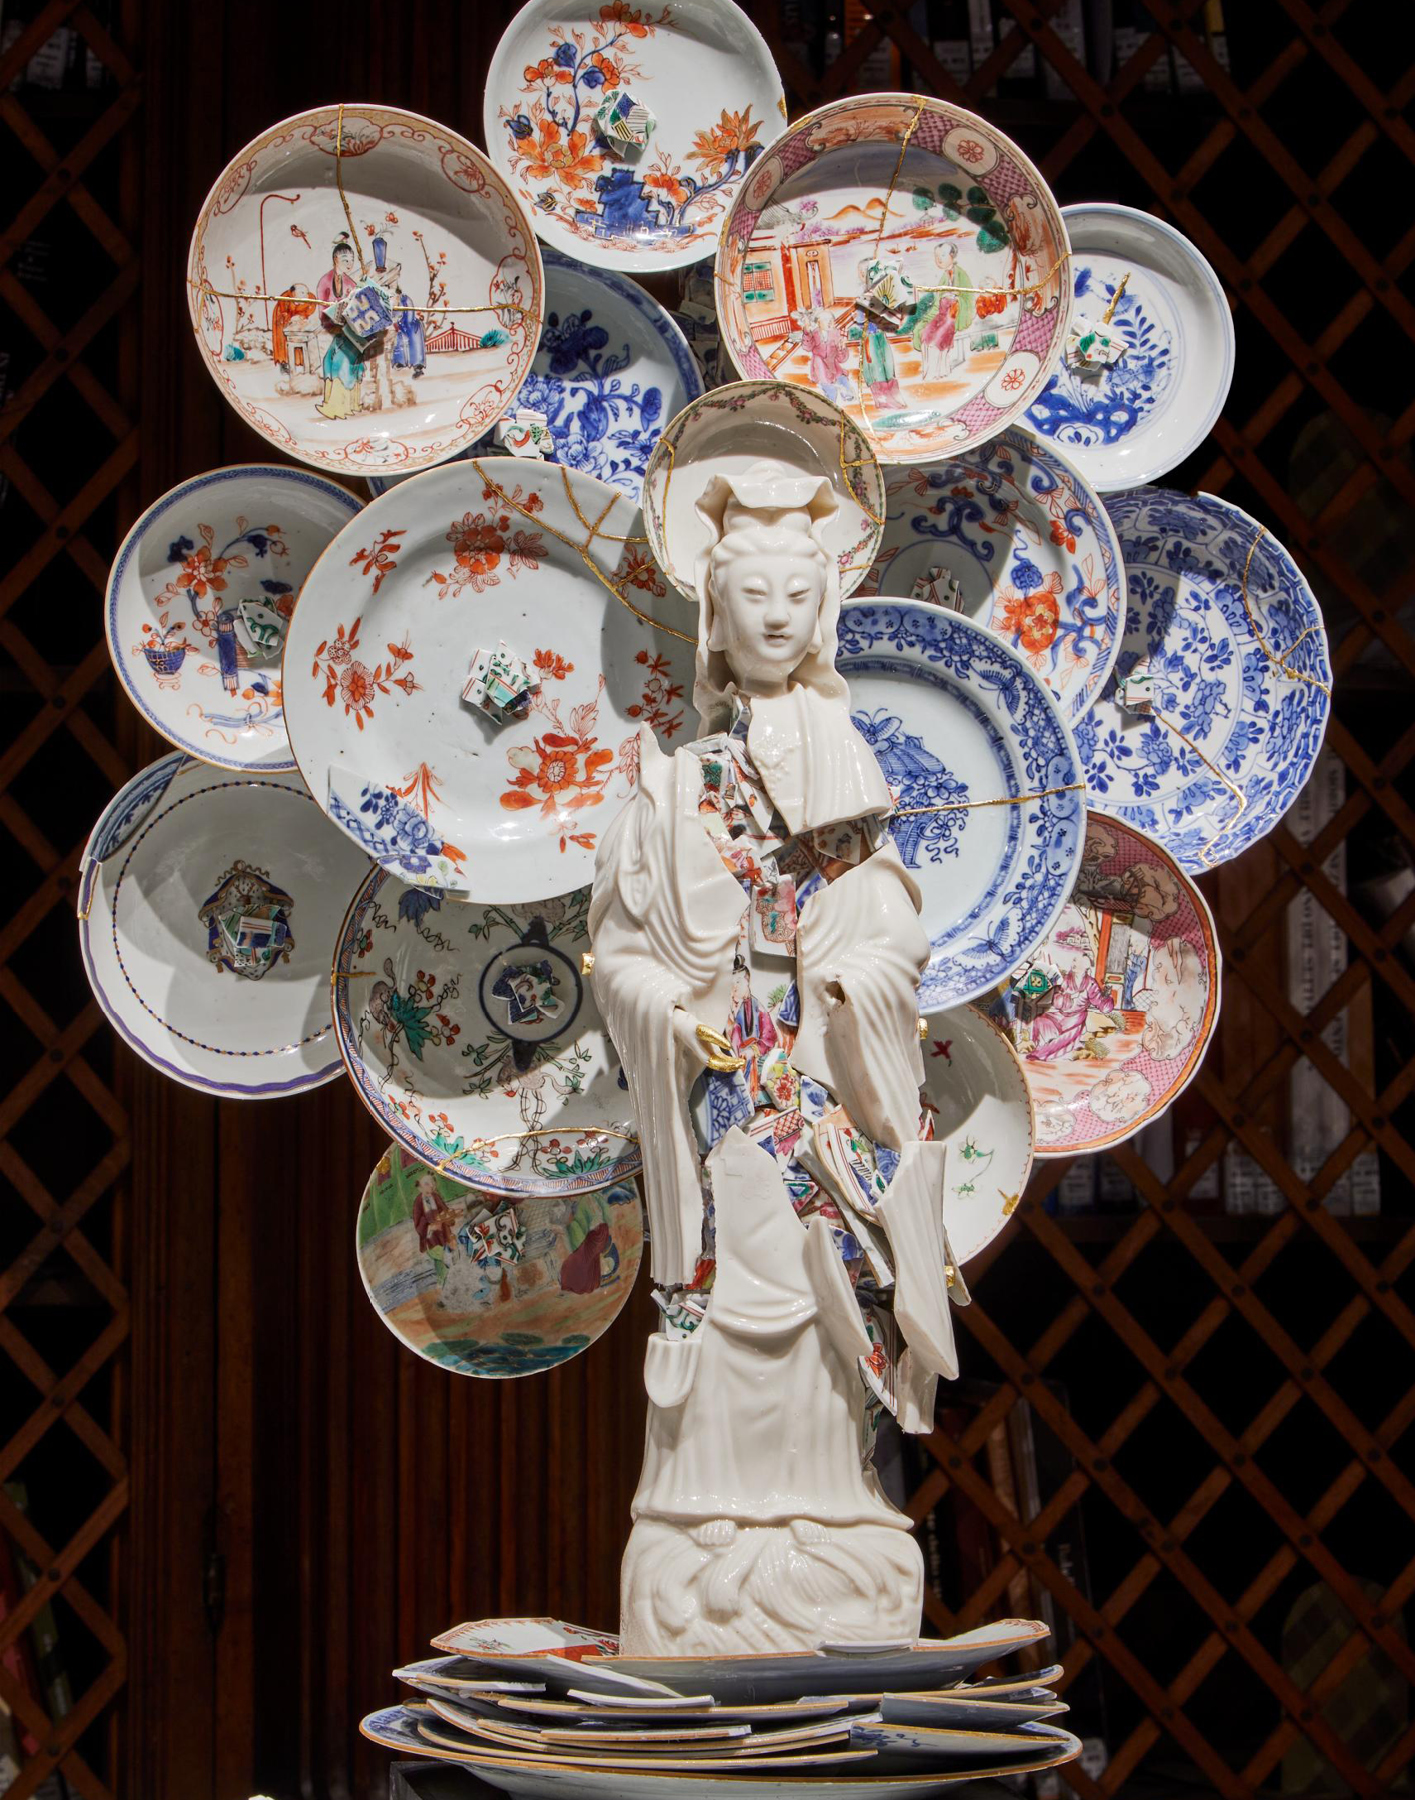 Guan Yin in a Sky of Saucers by Bouke de Vries for the Porcelain Virtuosity exhibition